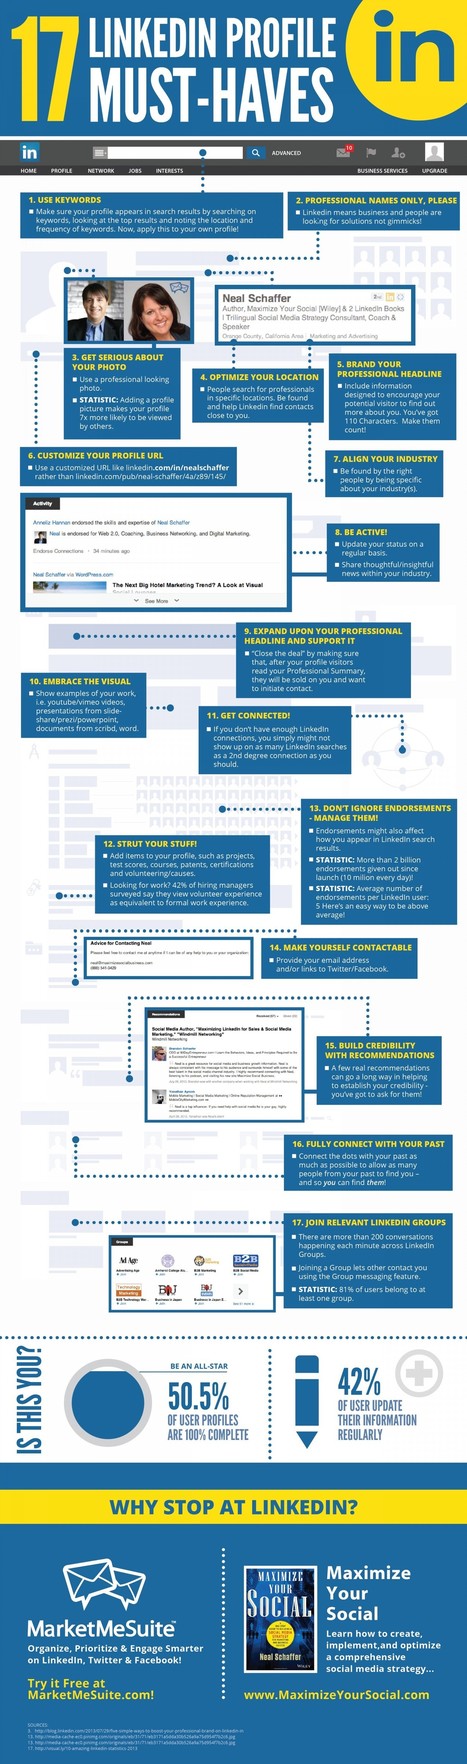 17 Steps to a Perfect Linkedin Profile - Social Media #Resume | Effective Resumes | Scoop.it